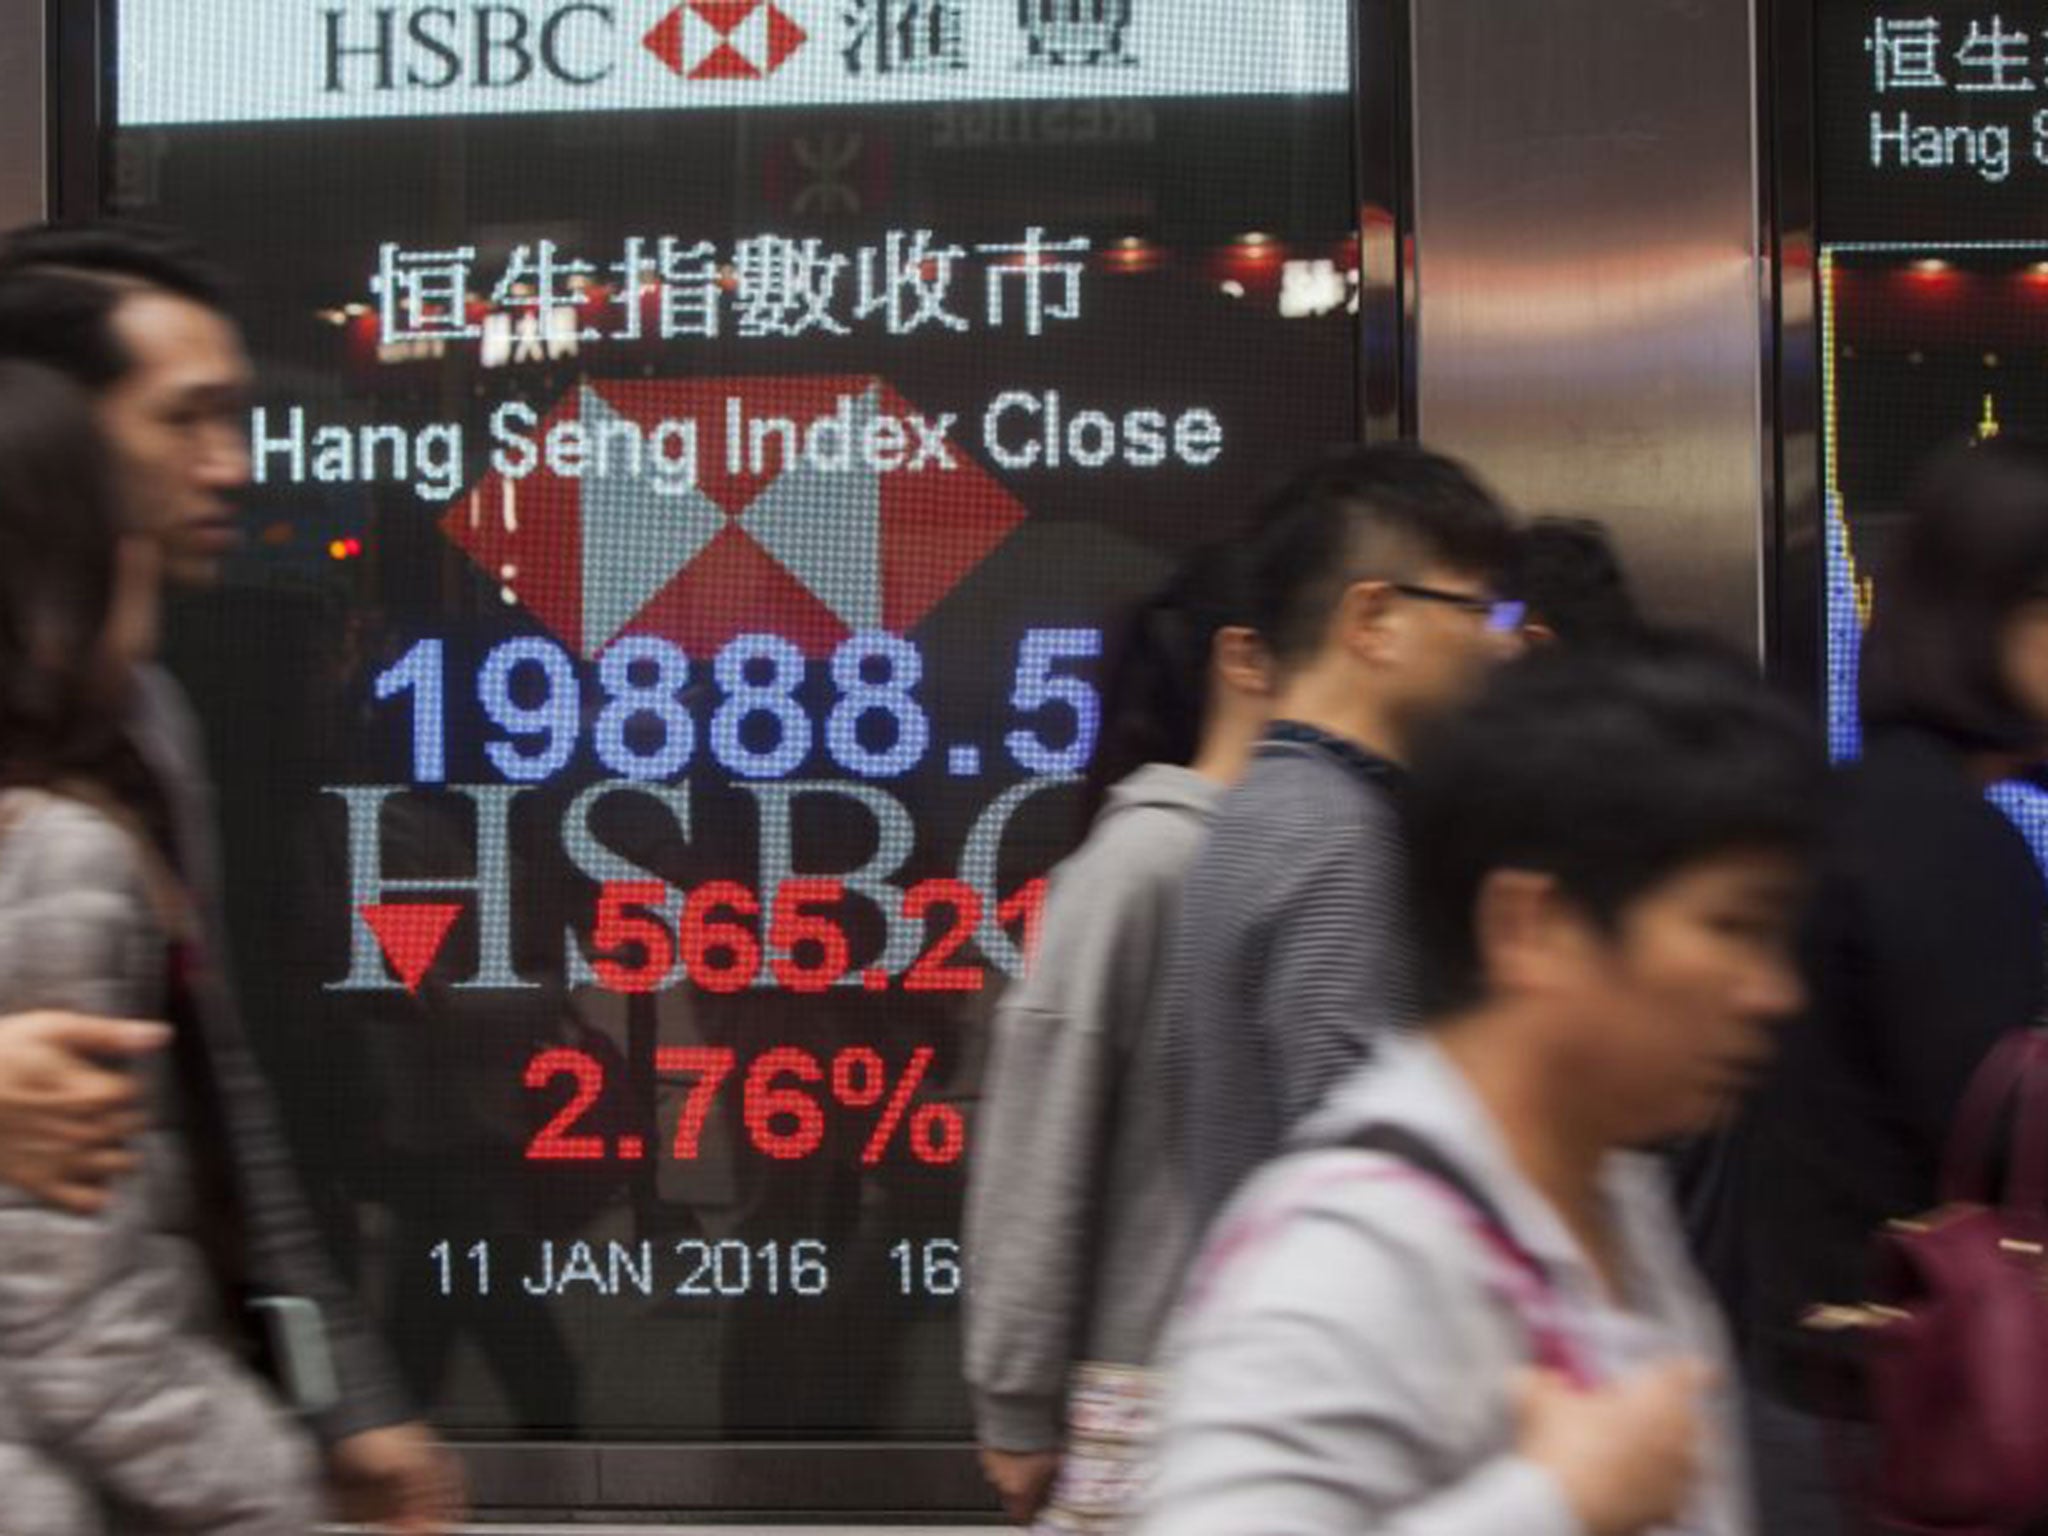 Is the turmoil in the financial markets an ominous sign? | The Independent